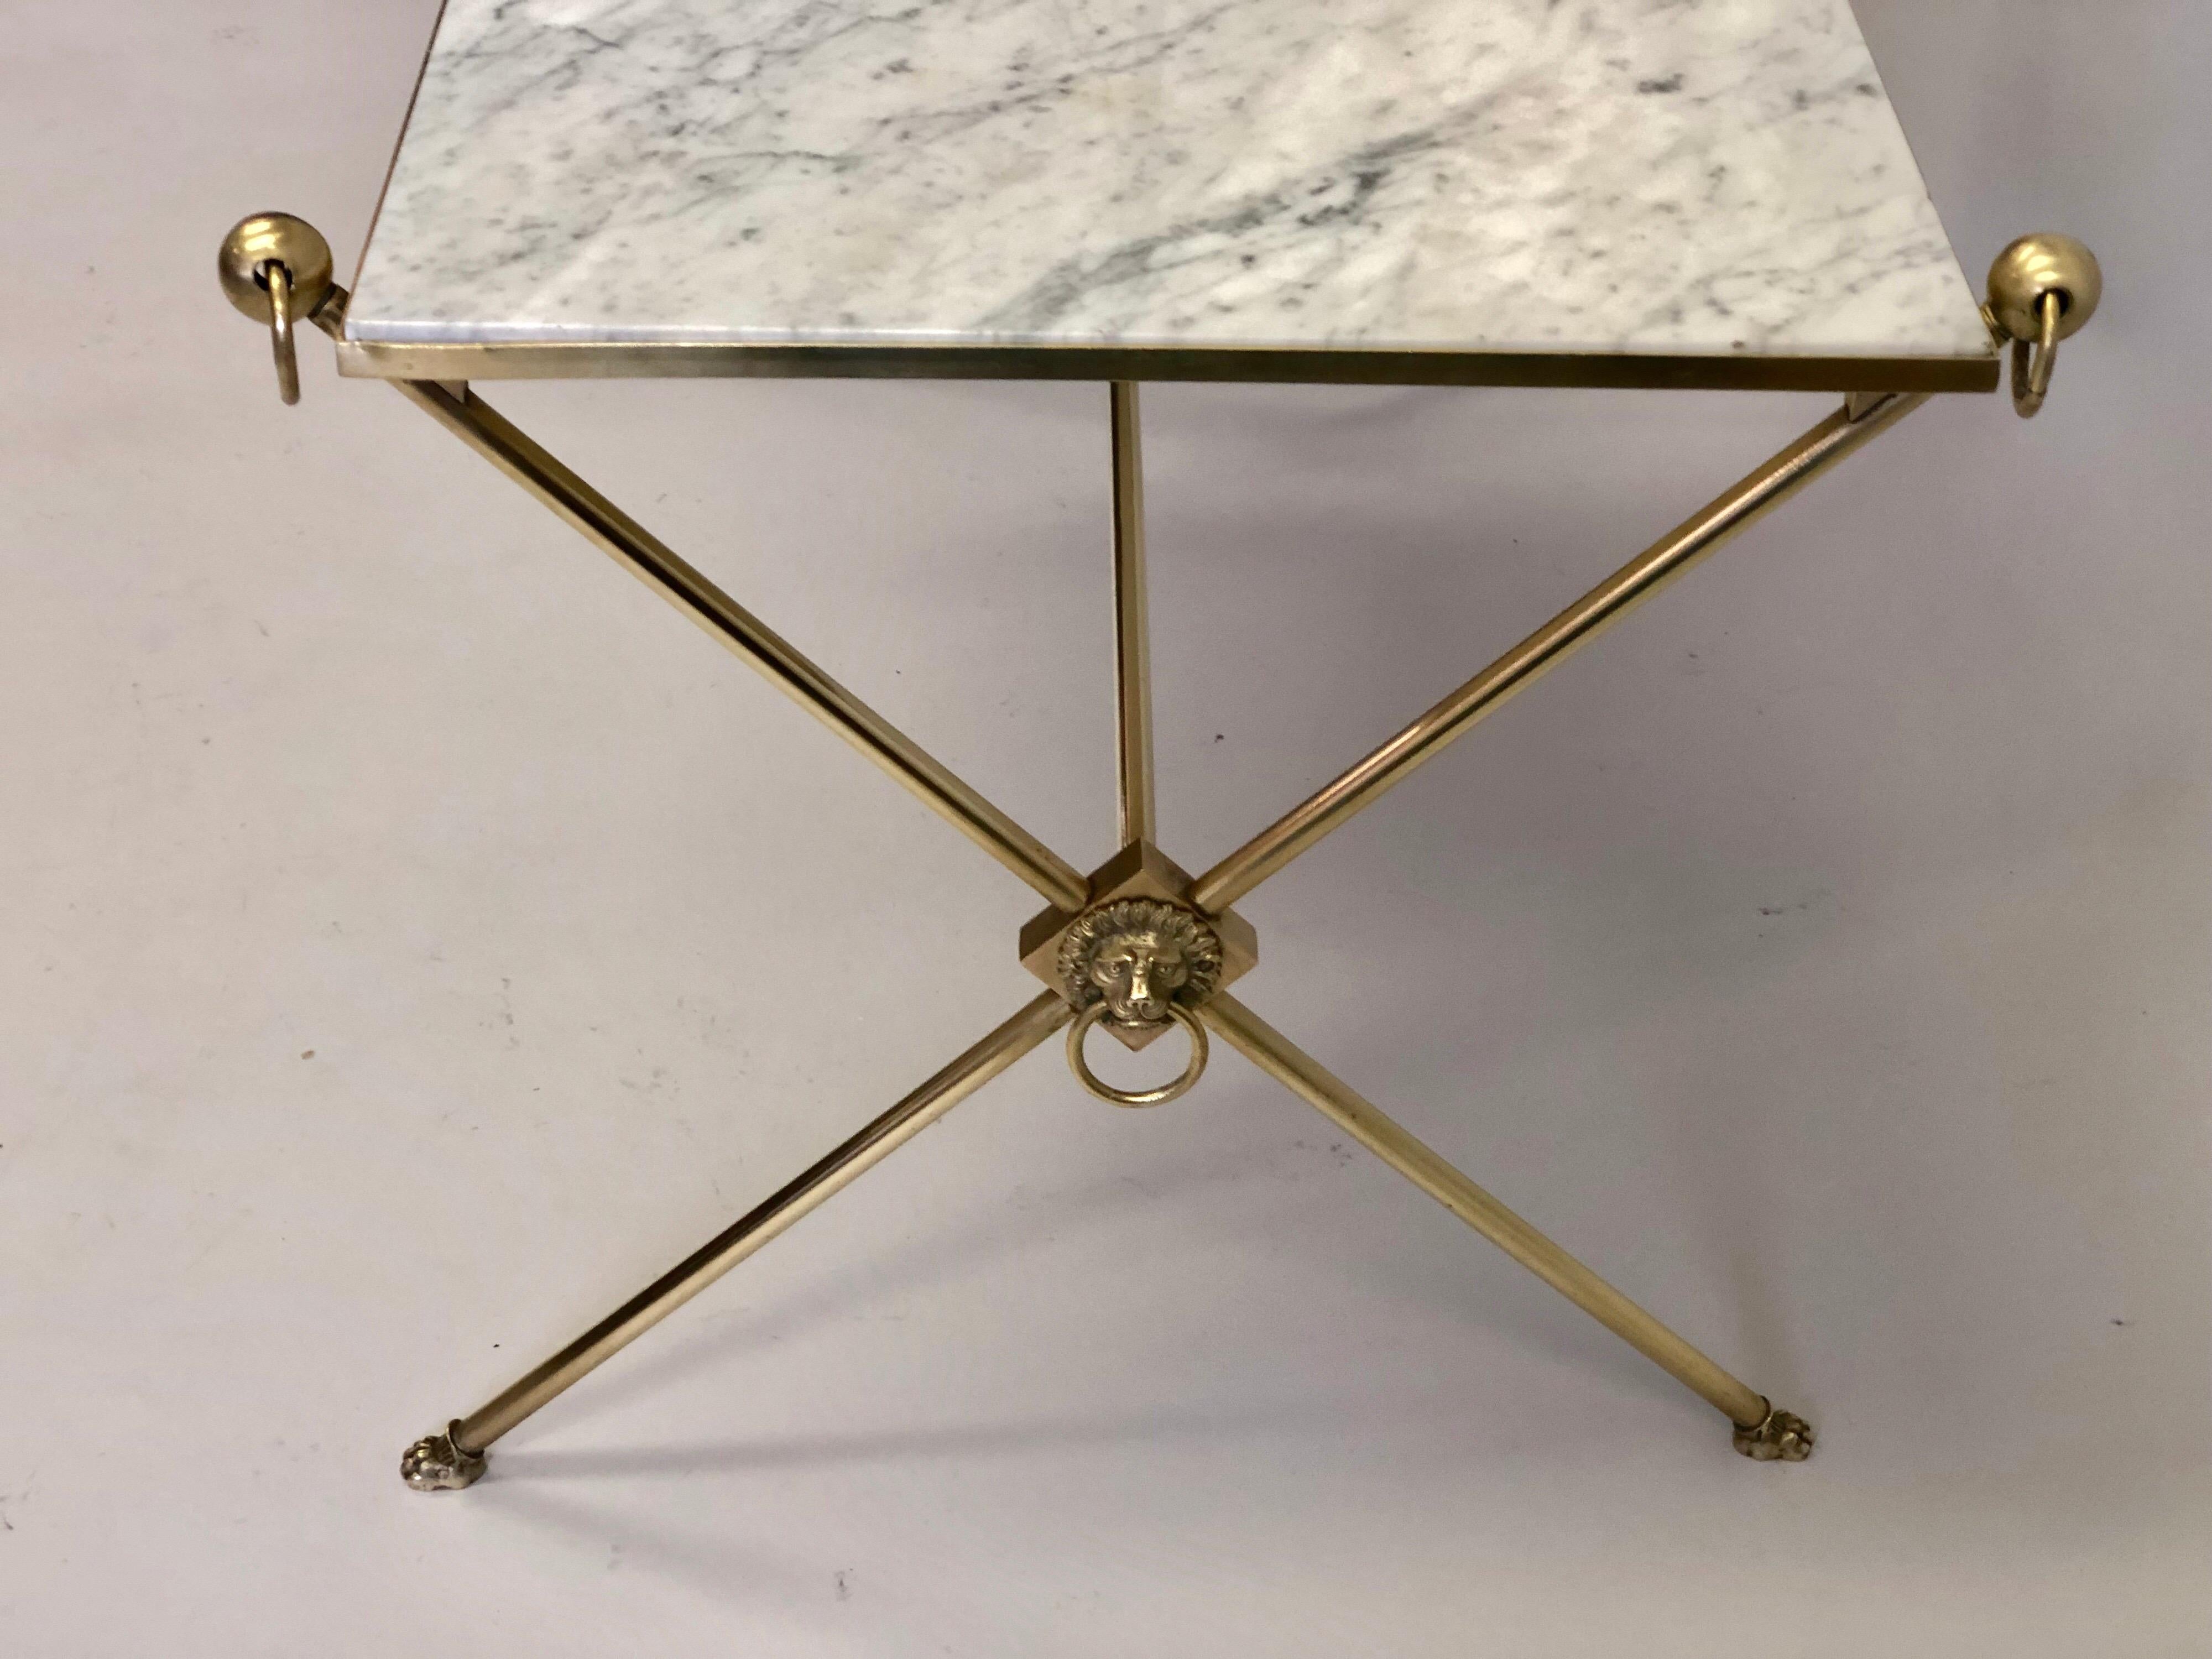 French Modern Neoclassical Brass and Marble Coffee Table by Maison Jansen 1